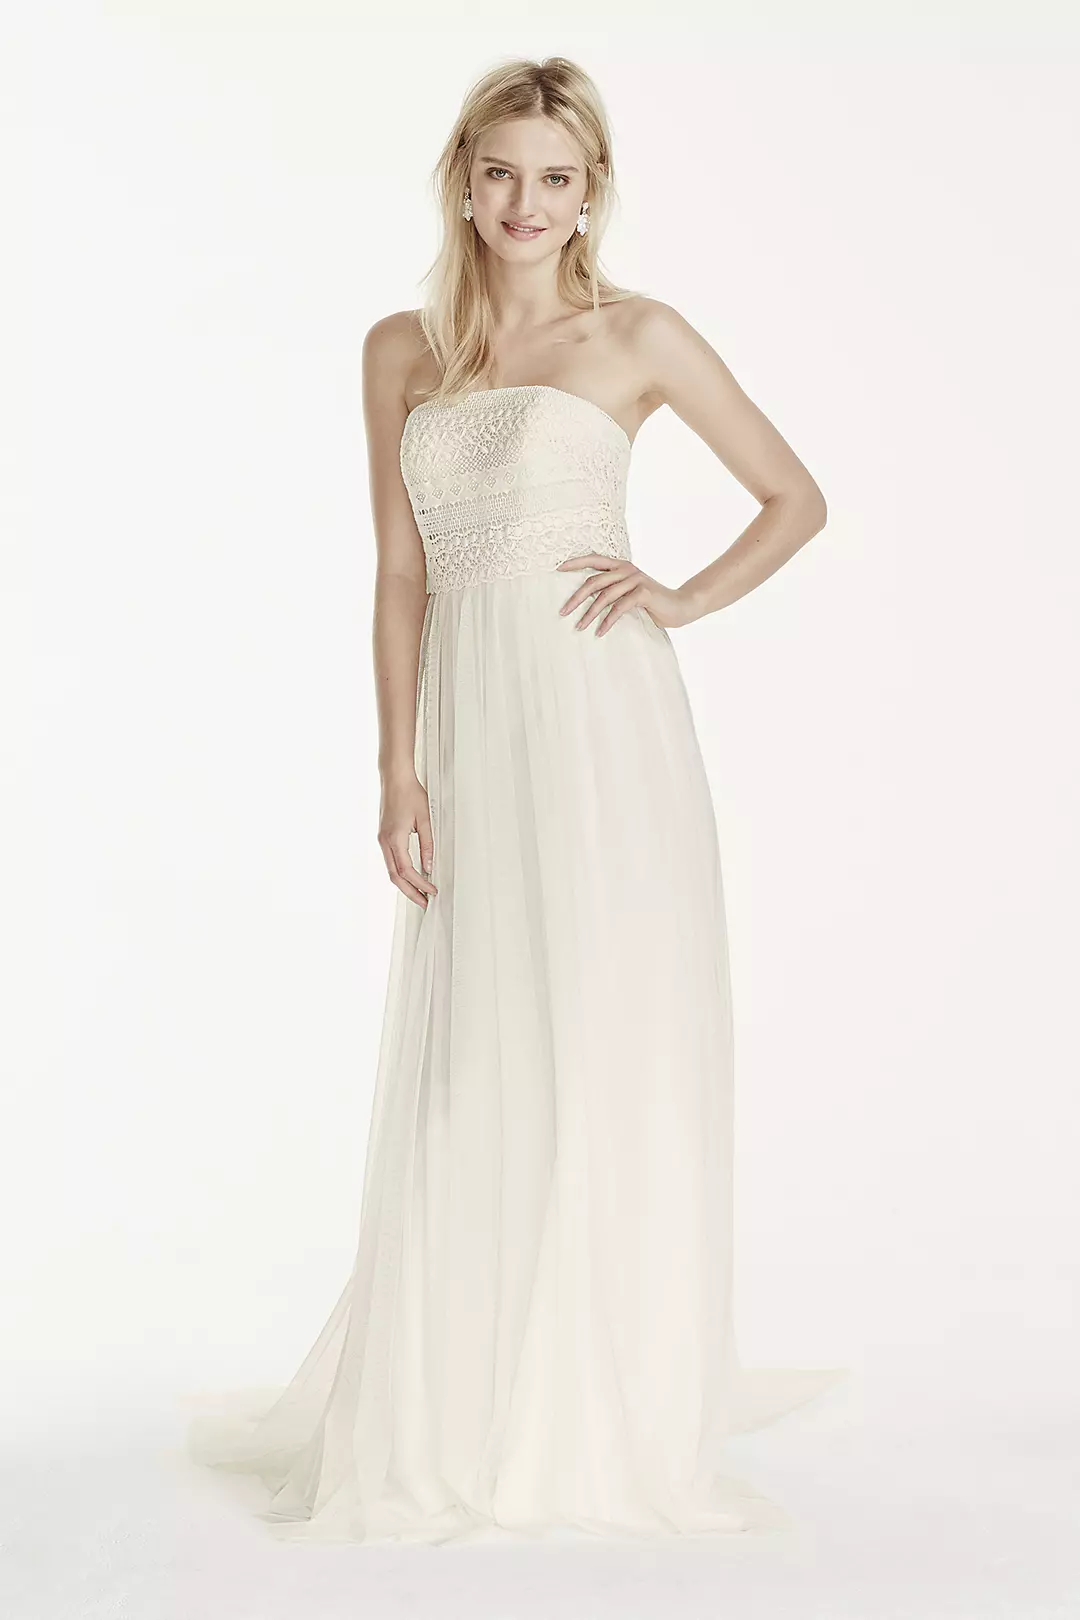 Strapless Tulle Sheath Dress with Lace Bodice Image